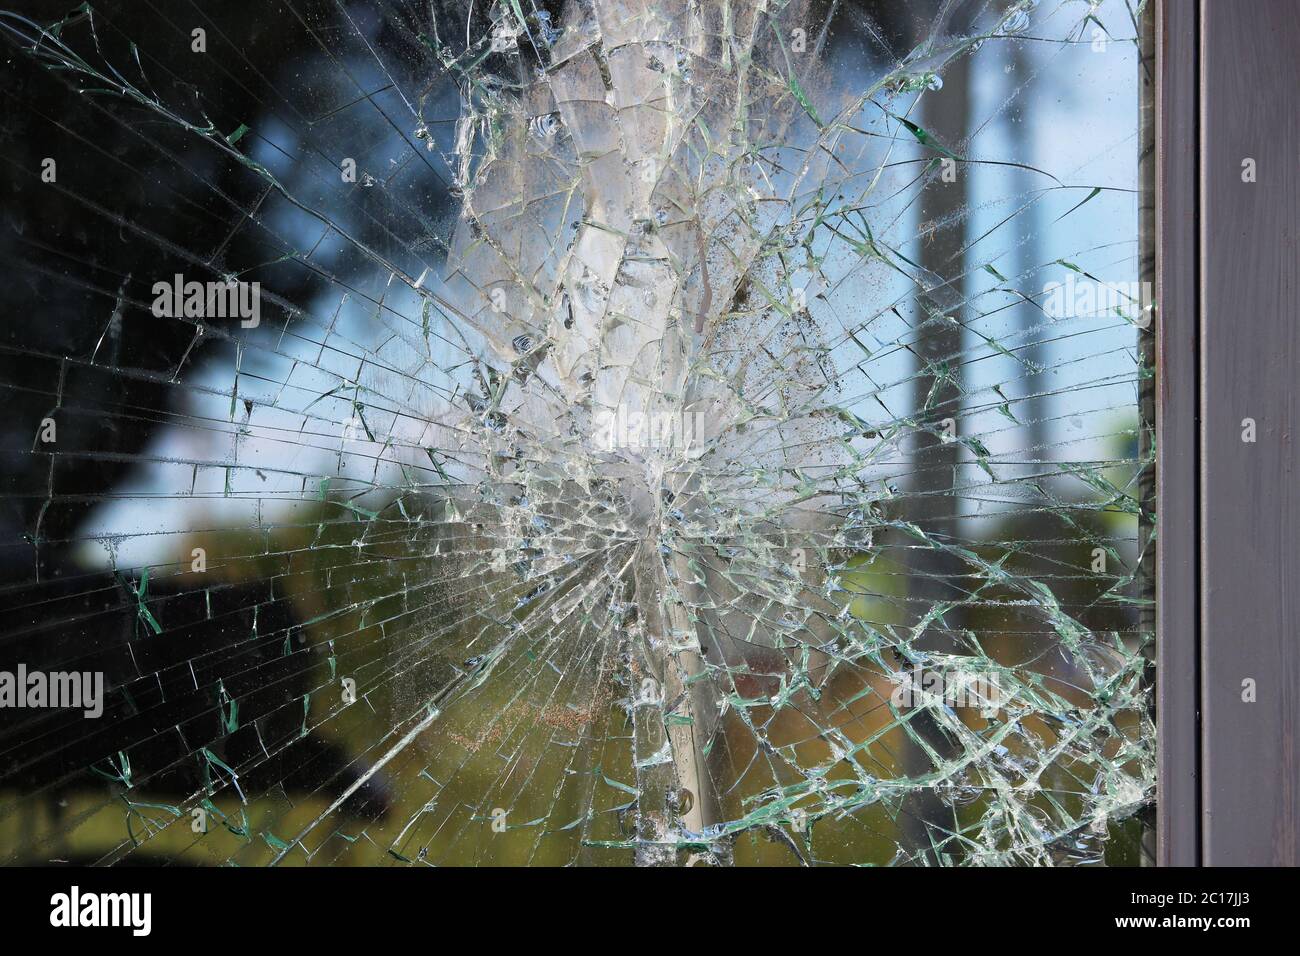 Vandals smashed the glass at a bus stop in the city Stock Photo